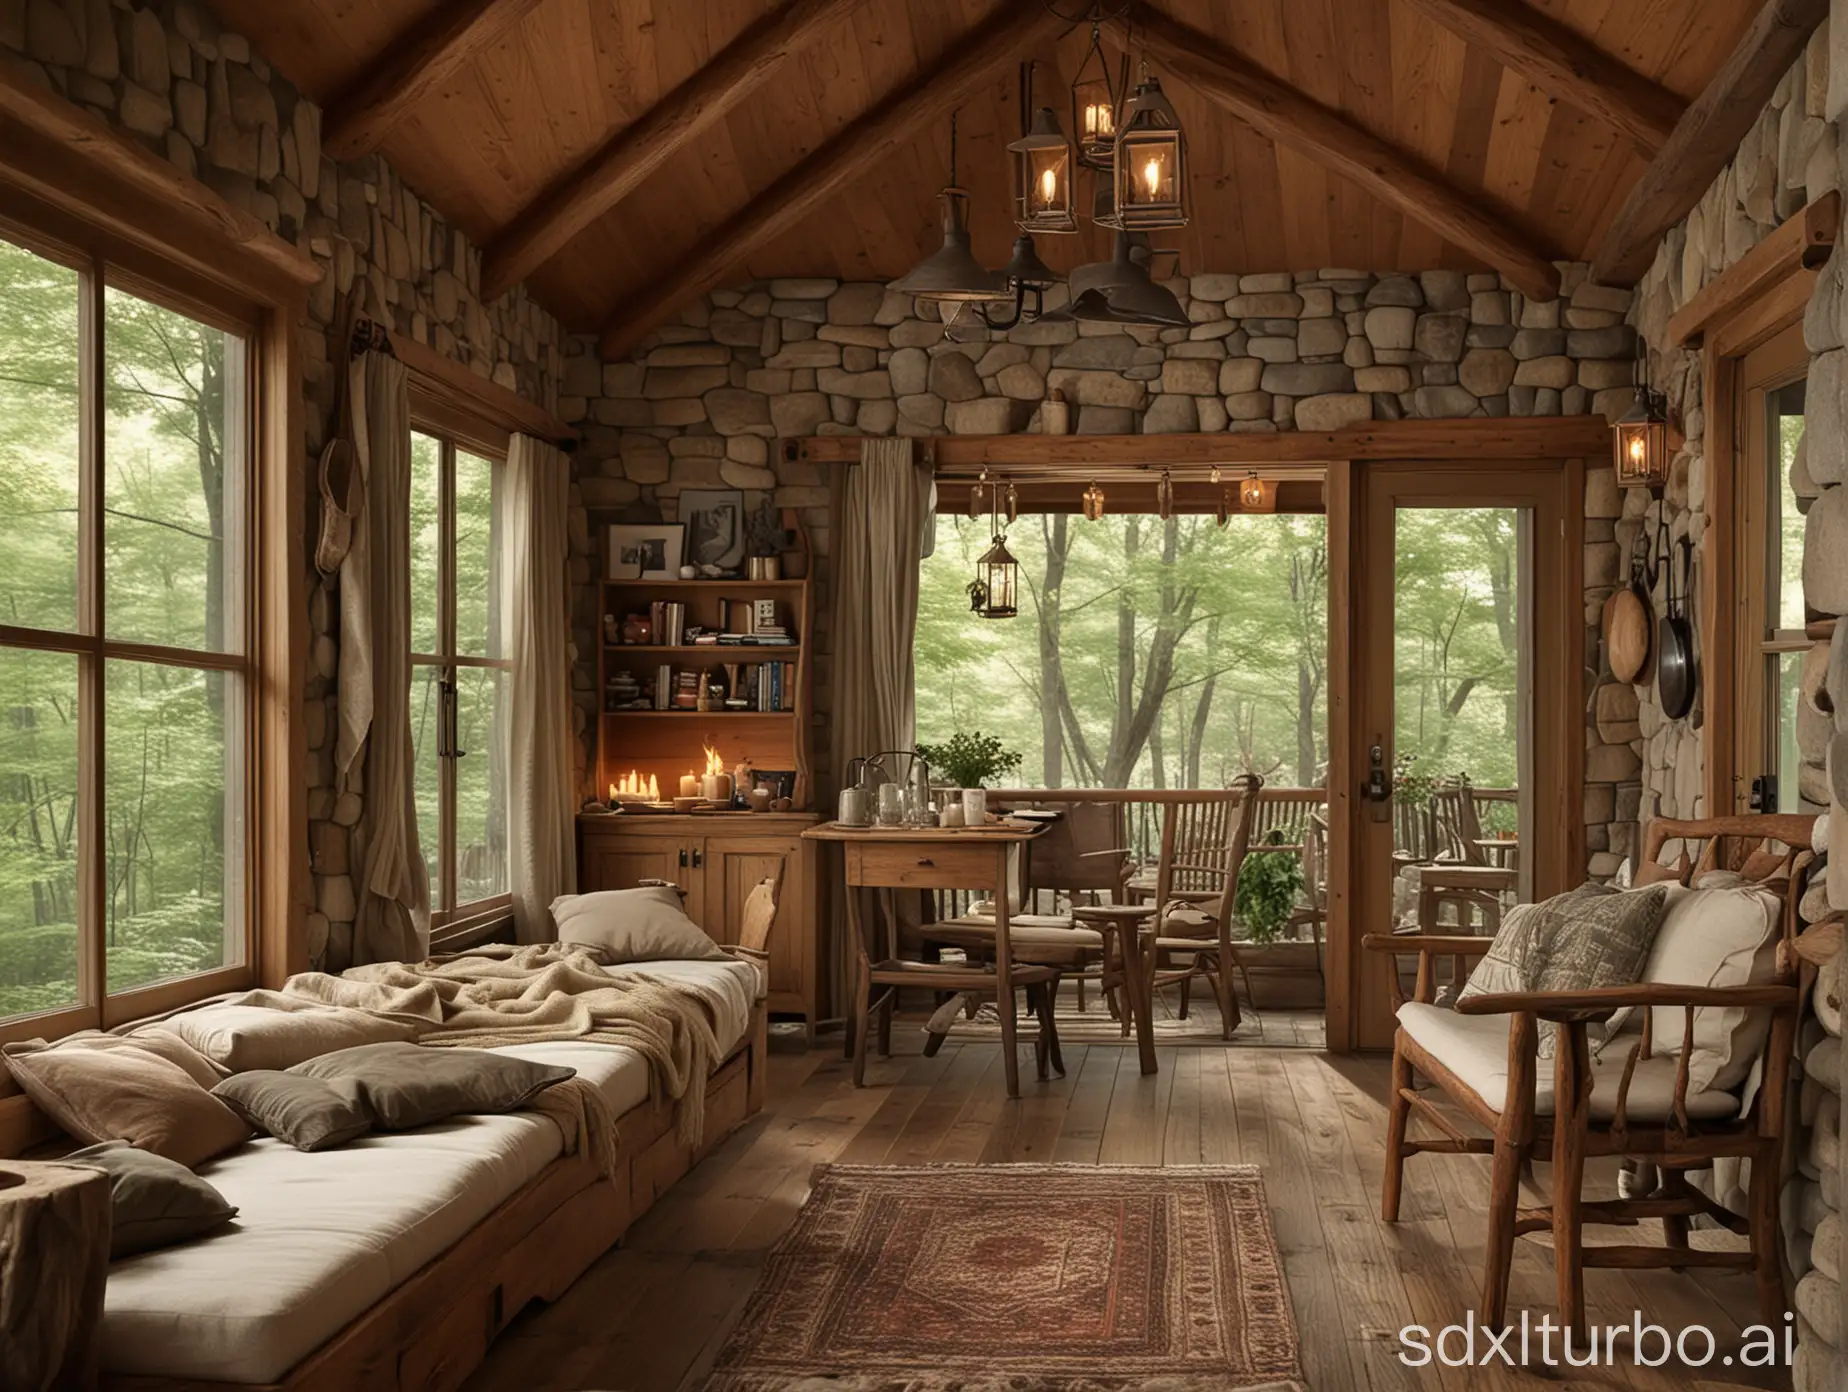 Tranquil-Forest-Cabin-Retreat-Cozy-Rustic-Comfort-in-Lush-Greenery